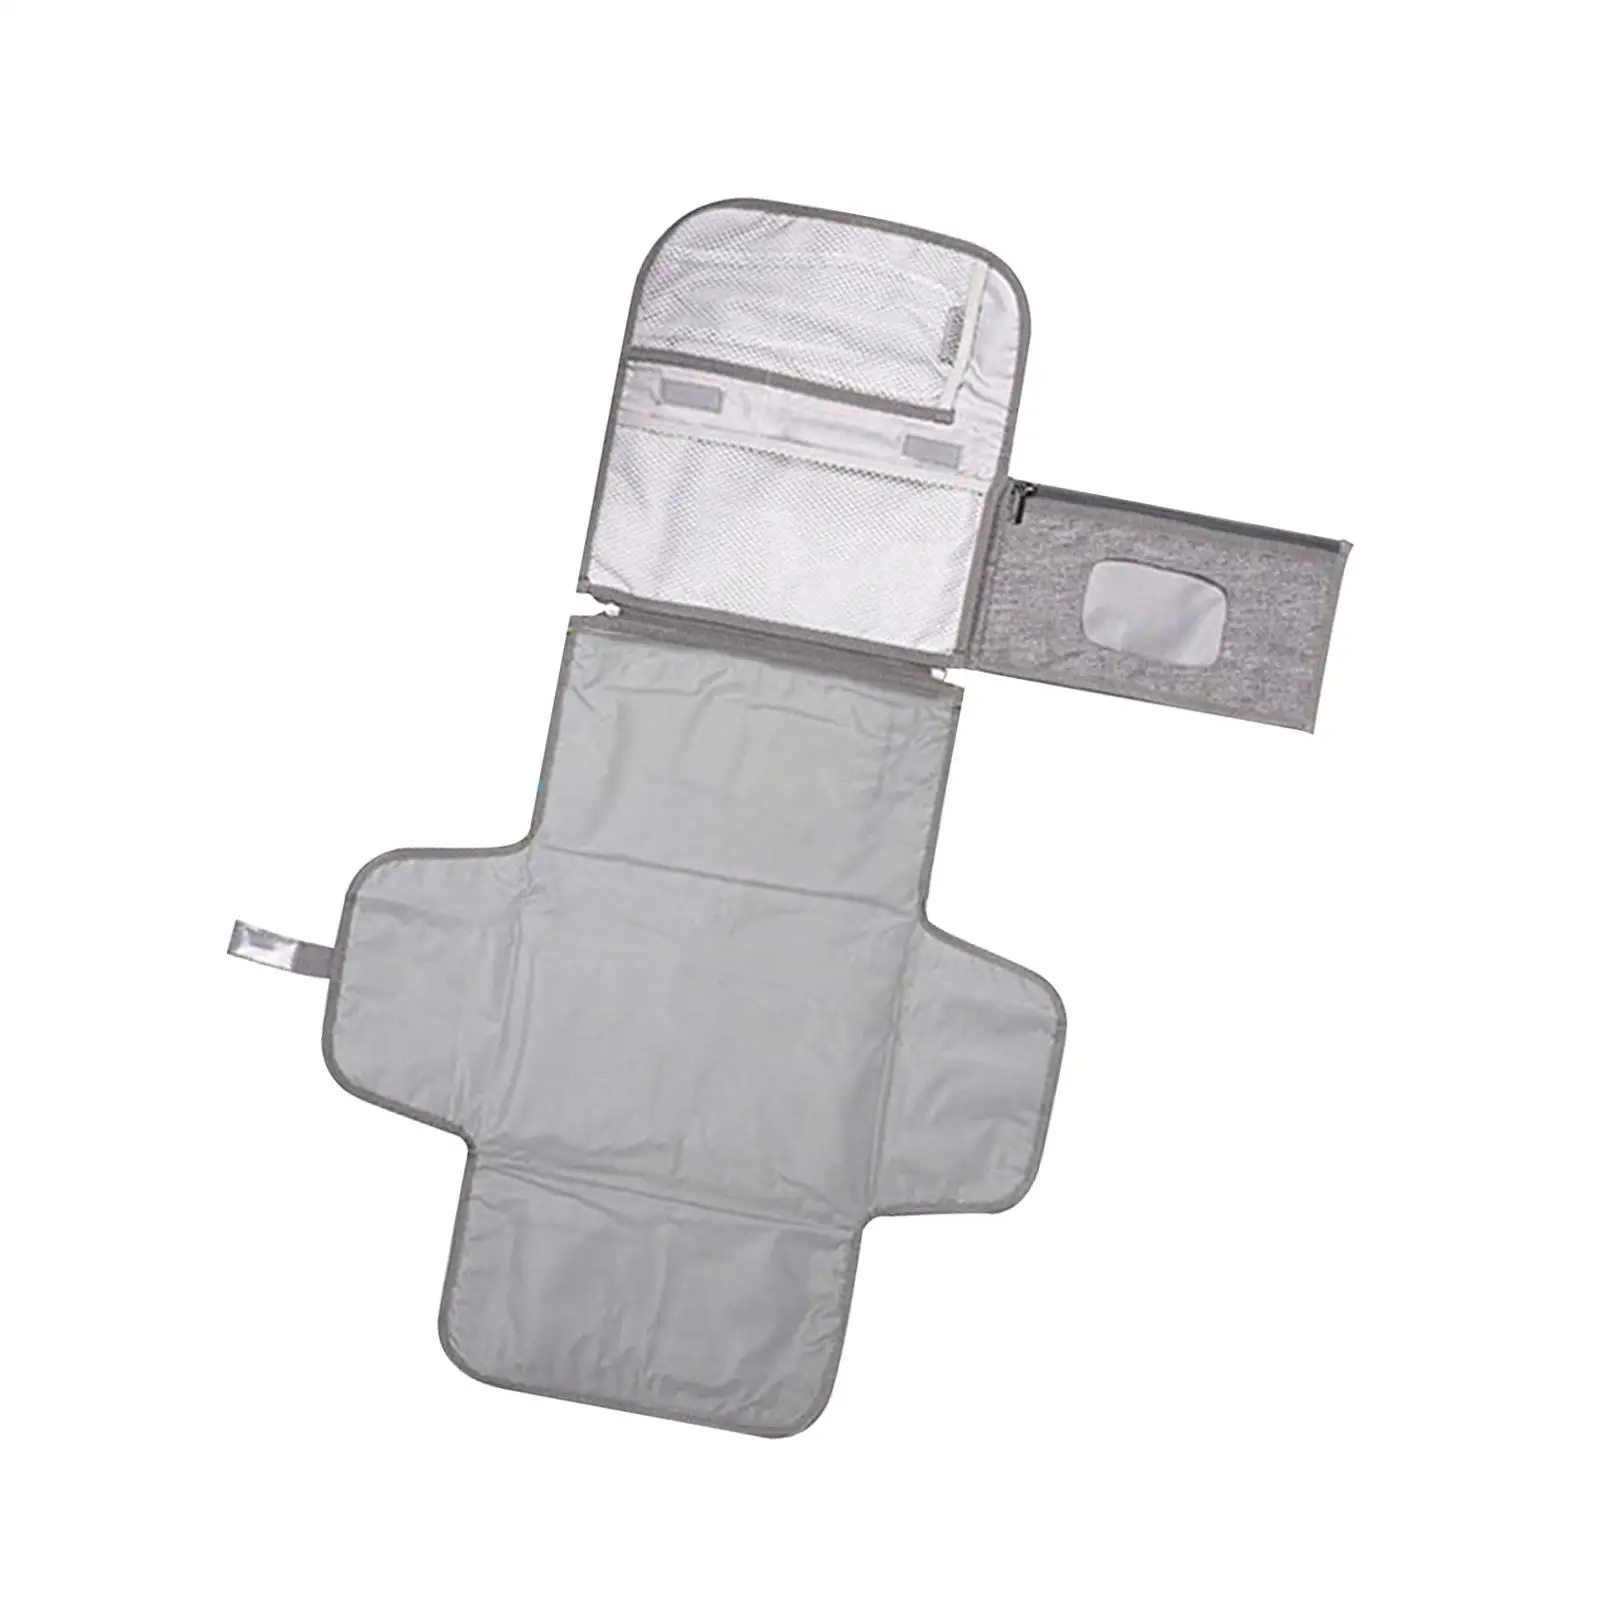 Diaper Changing Pad Baby Diaper Changing Mat Easily Cleanable Waterproof Travel